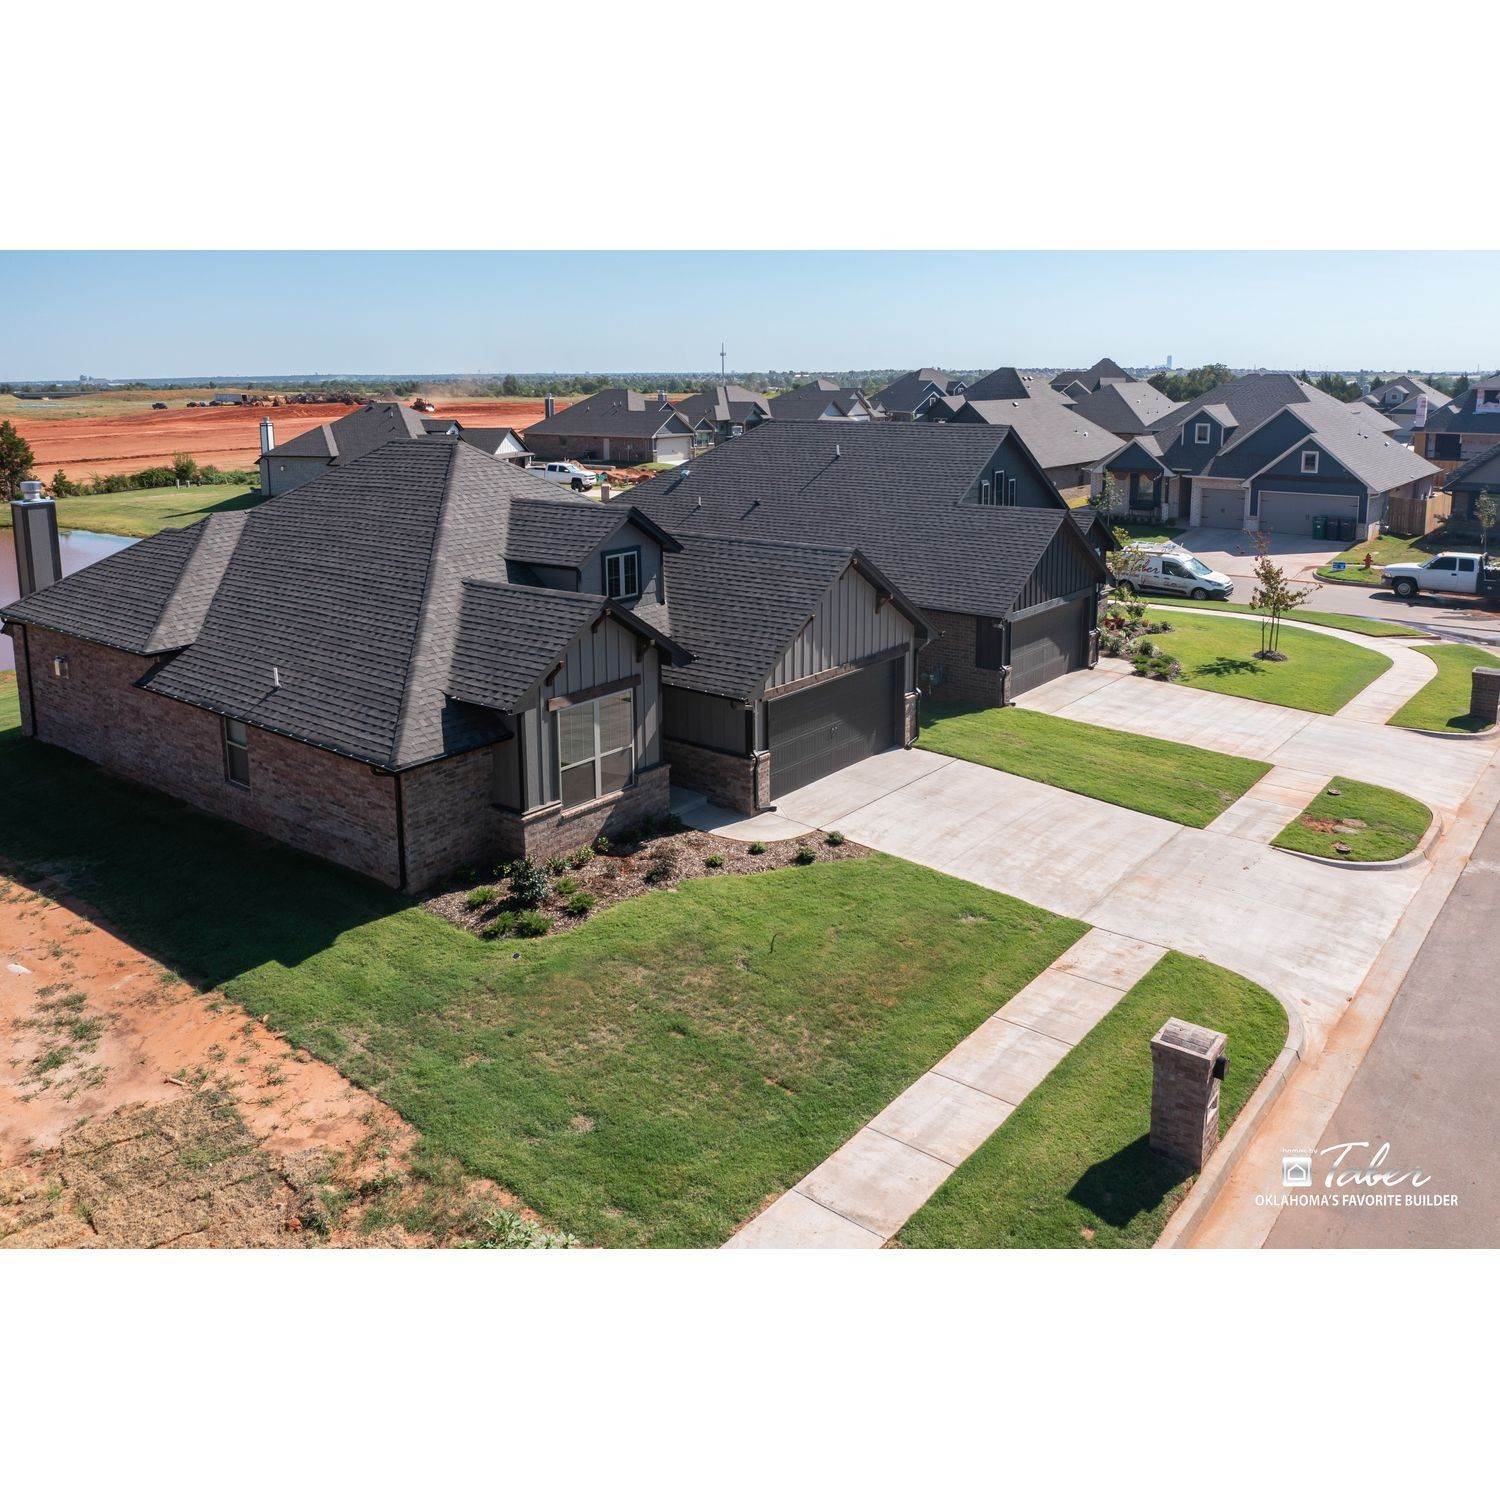 9. Canyons bâtiment à 10533 SW 52nd St, Mustang, OK 73064